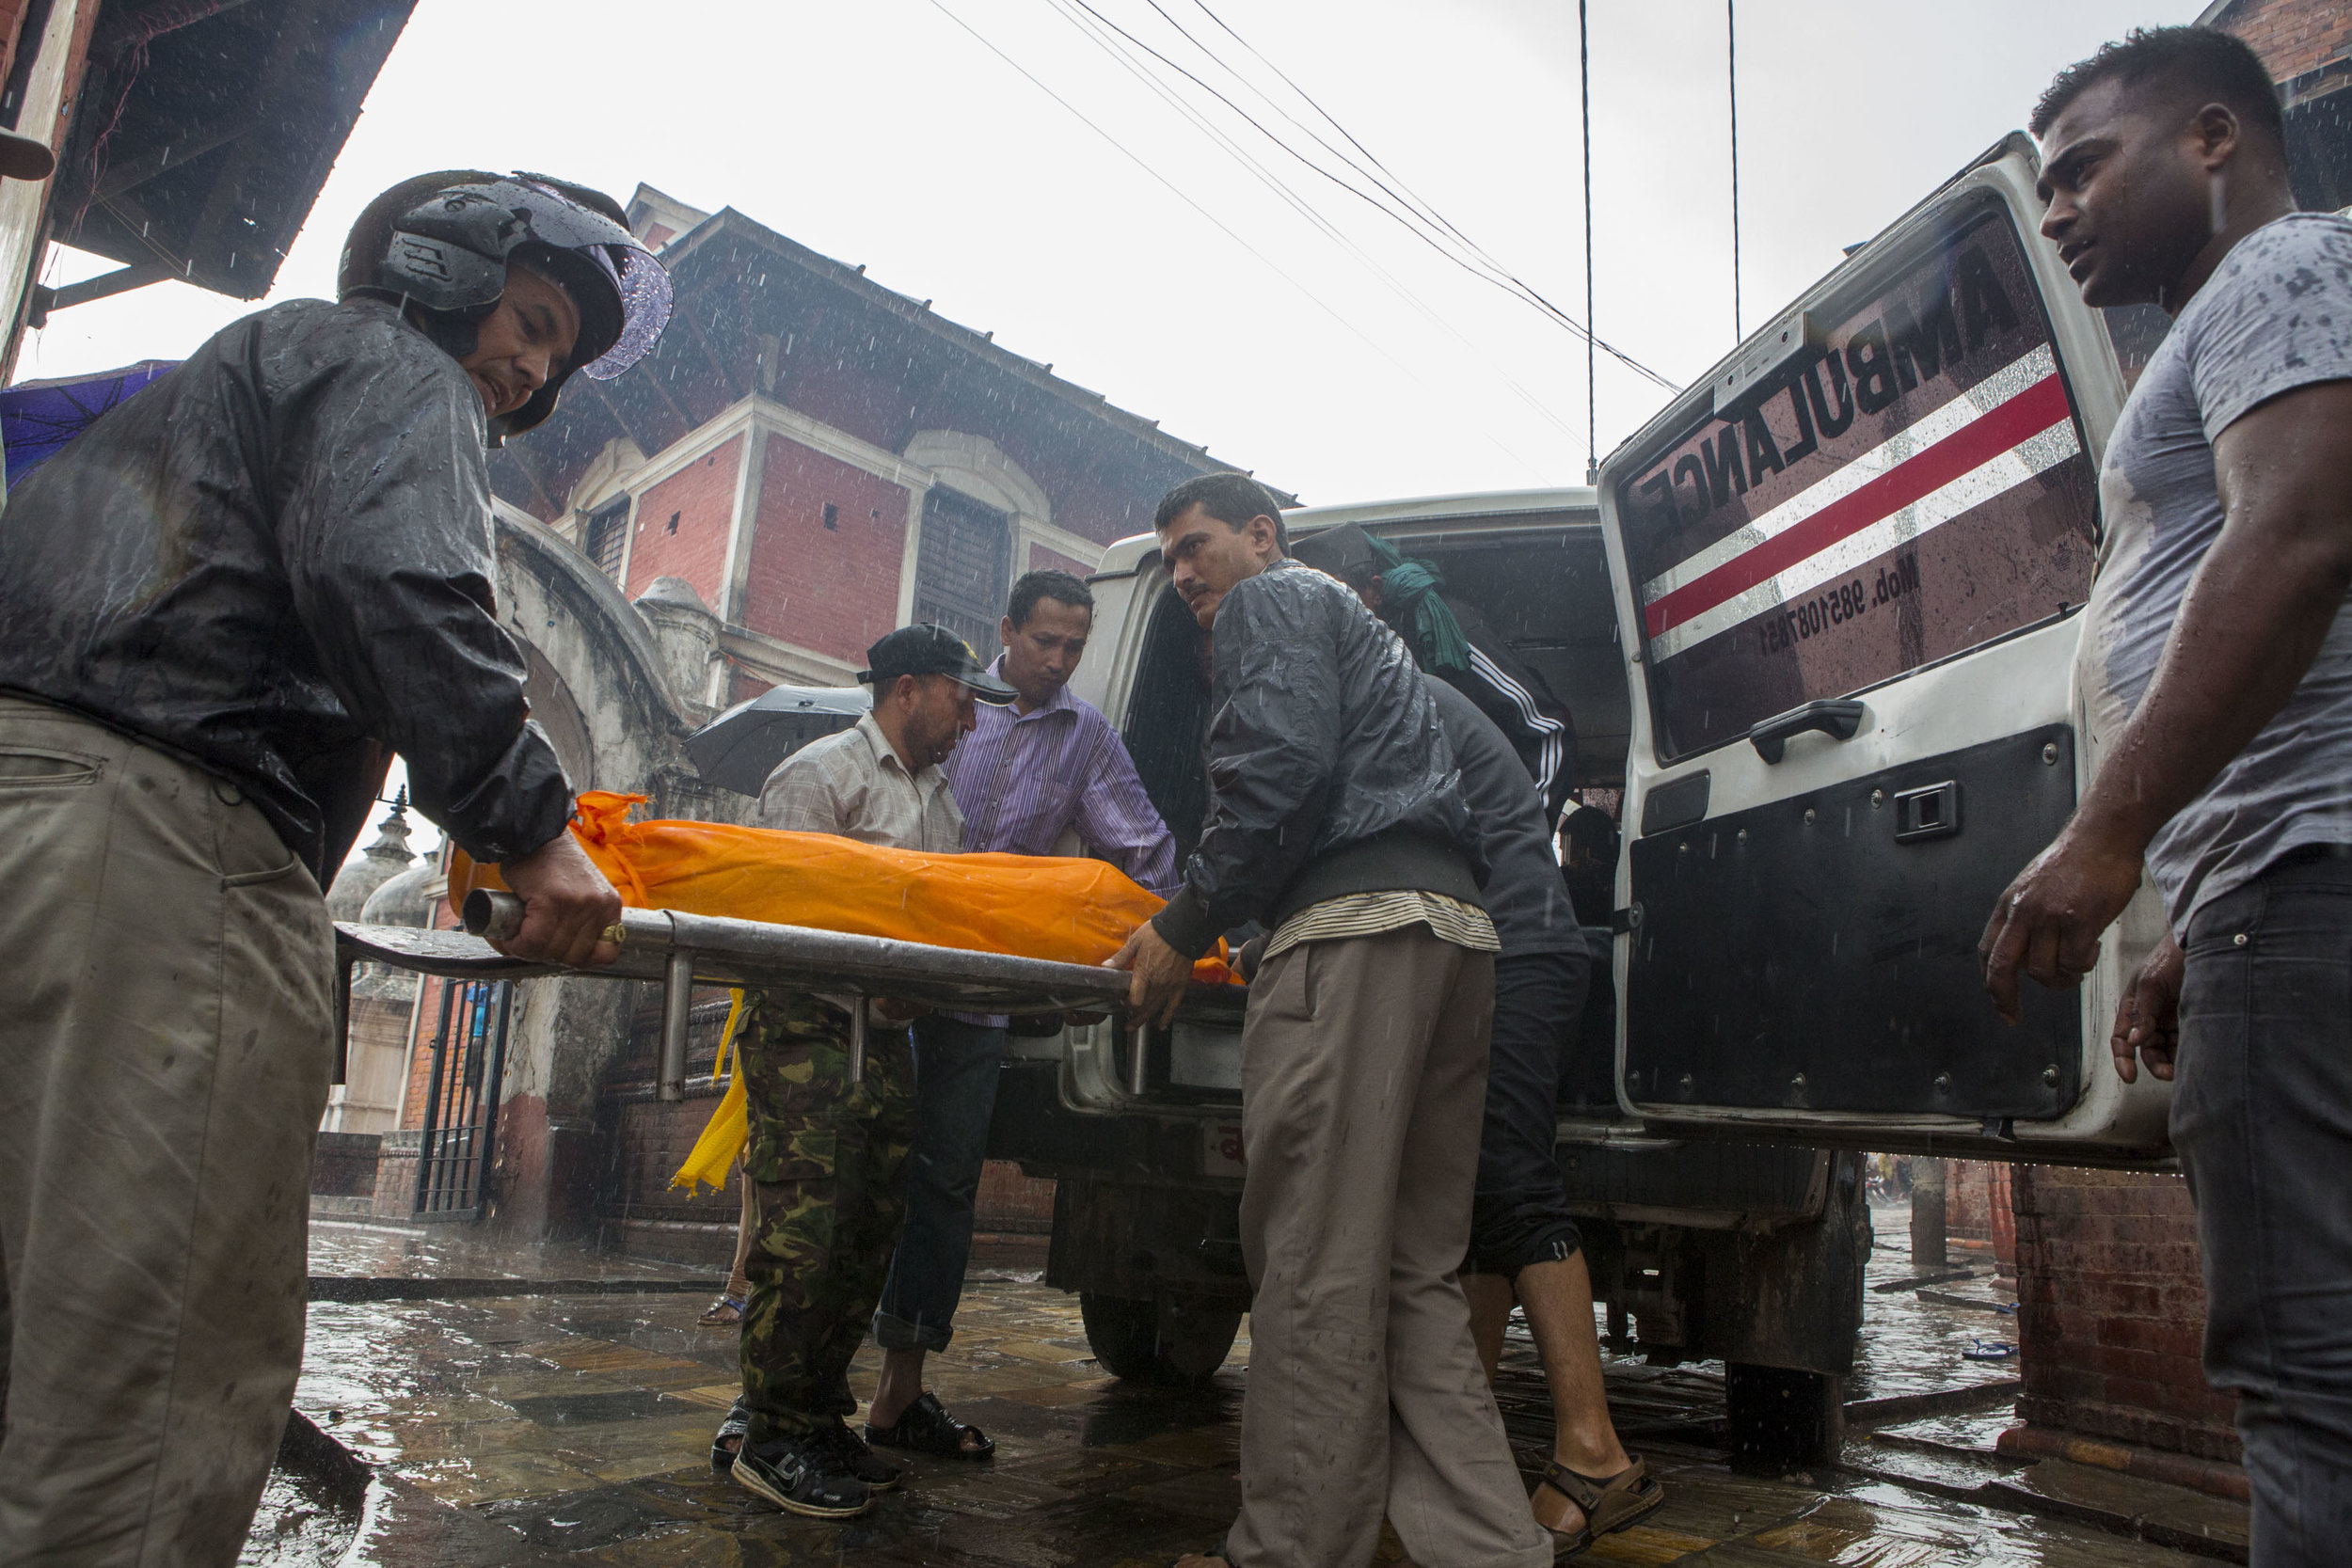  Men unload a body from an ambulance at Pashupati in order to begin its cleansing on the river bank.&nbsp; 